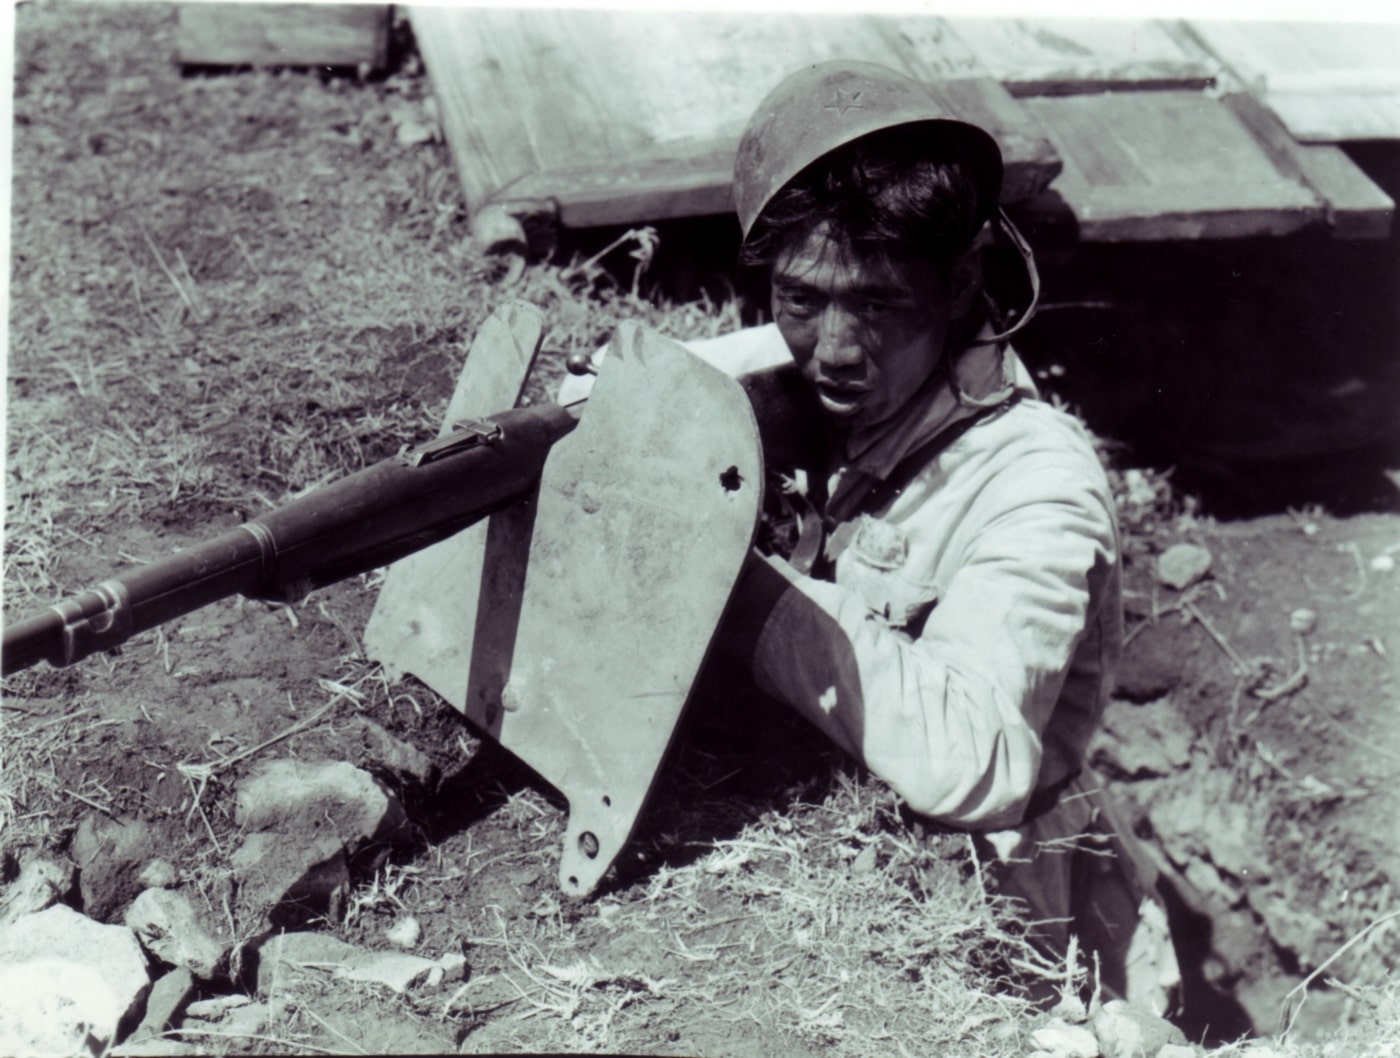 In this rare photo, we see a Chinese soldier of the National Revolutionary Army using an armored shield captured from a member of the Manchukuo Imperial Army which was under the control of the Imperial Japanese Army.  The Manchukuo Imperial Army was the ground force of the military of the Manchukuo, a puppet state established by Imperial Japan in Manchuria, a region of northeastern China.